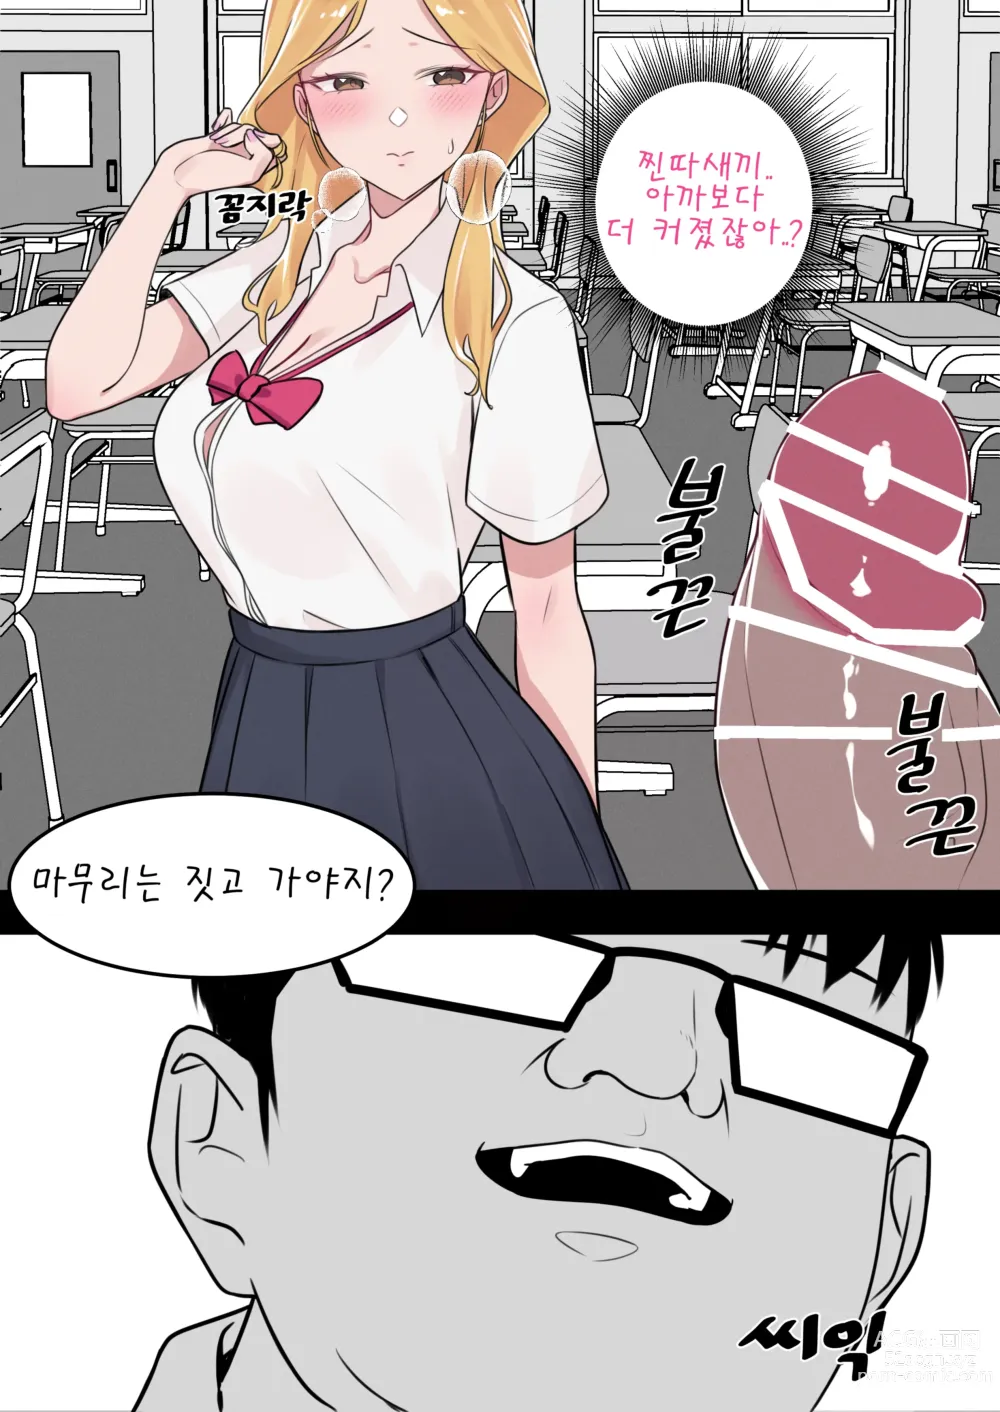 Page 8 of doujinshi After school with Il Jin-nyeo